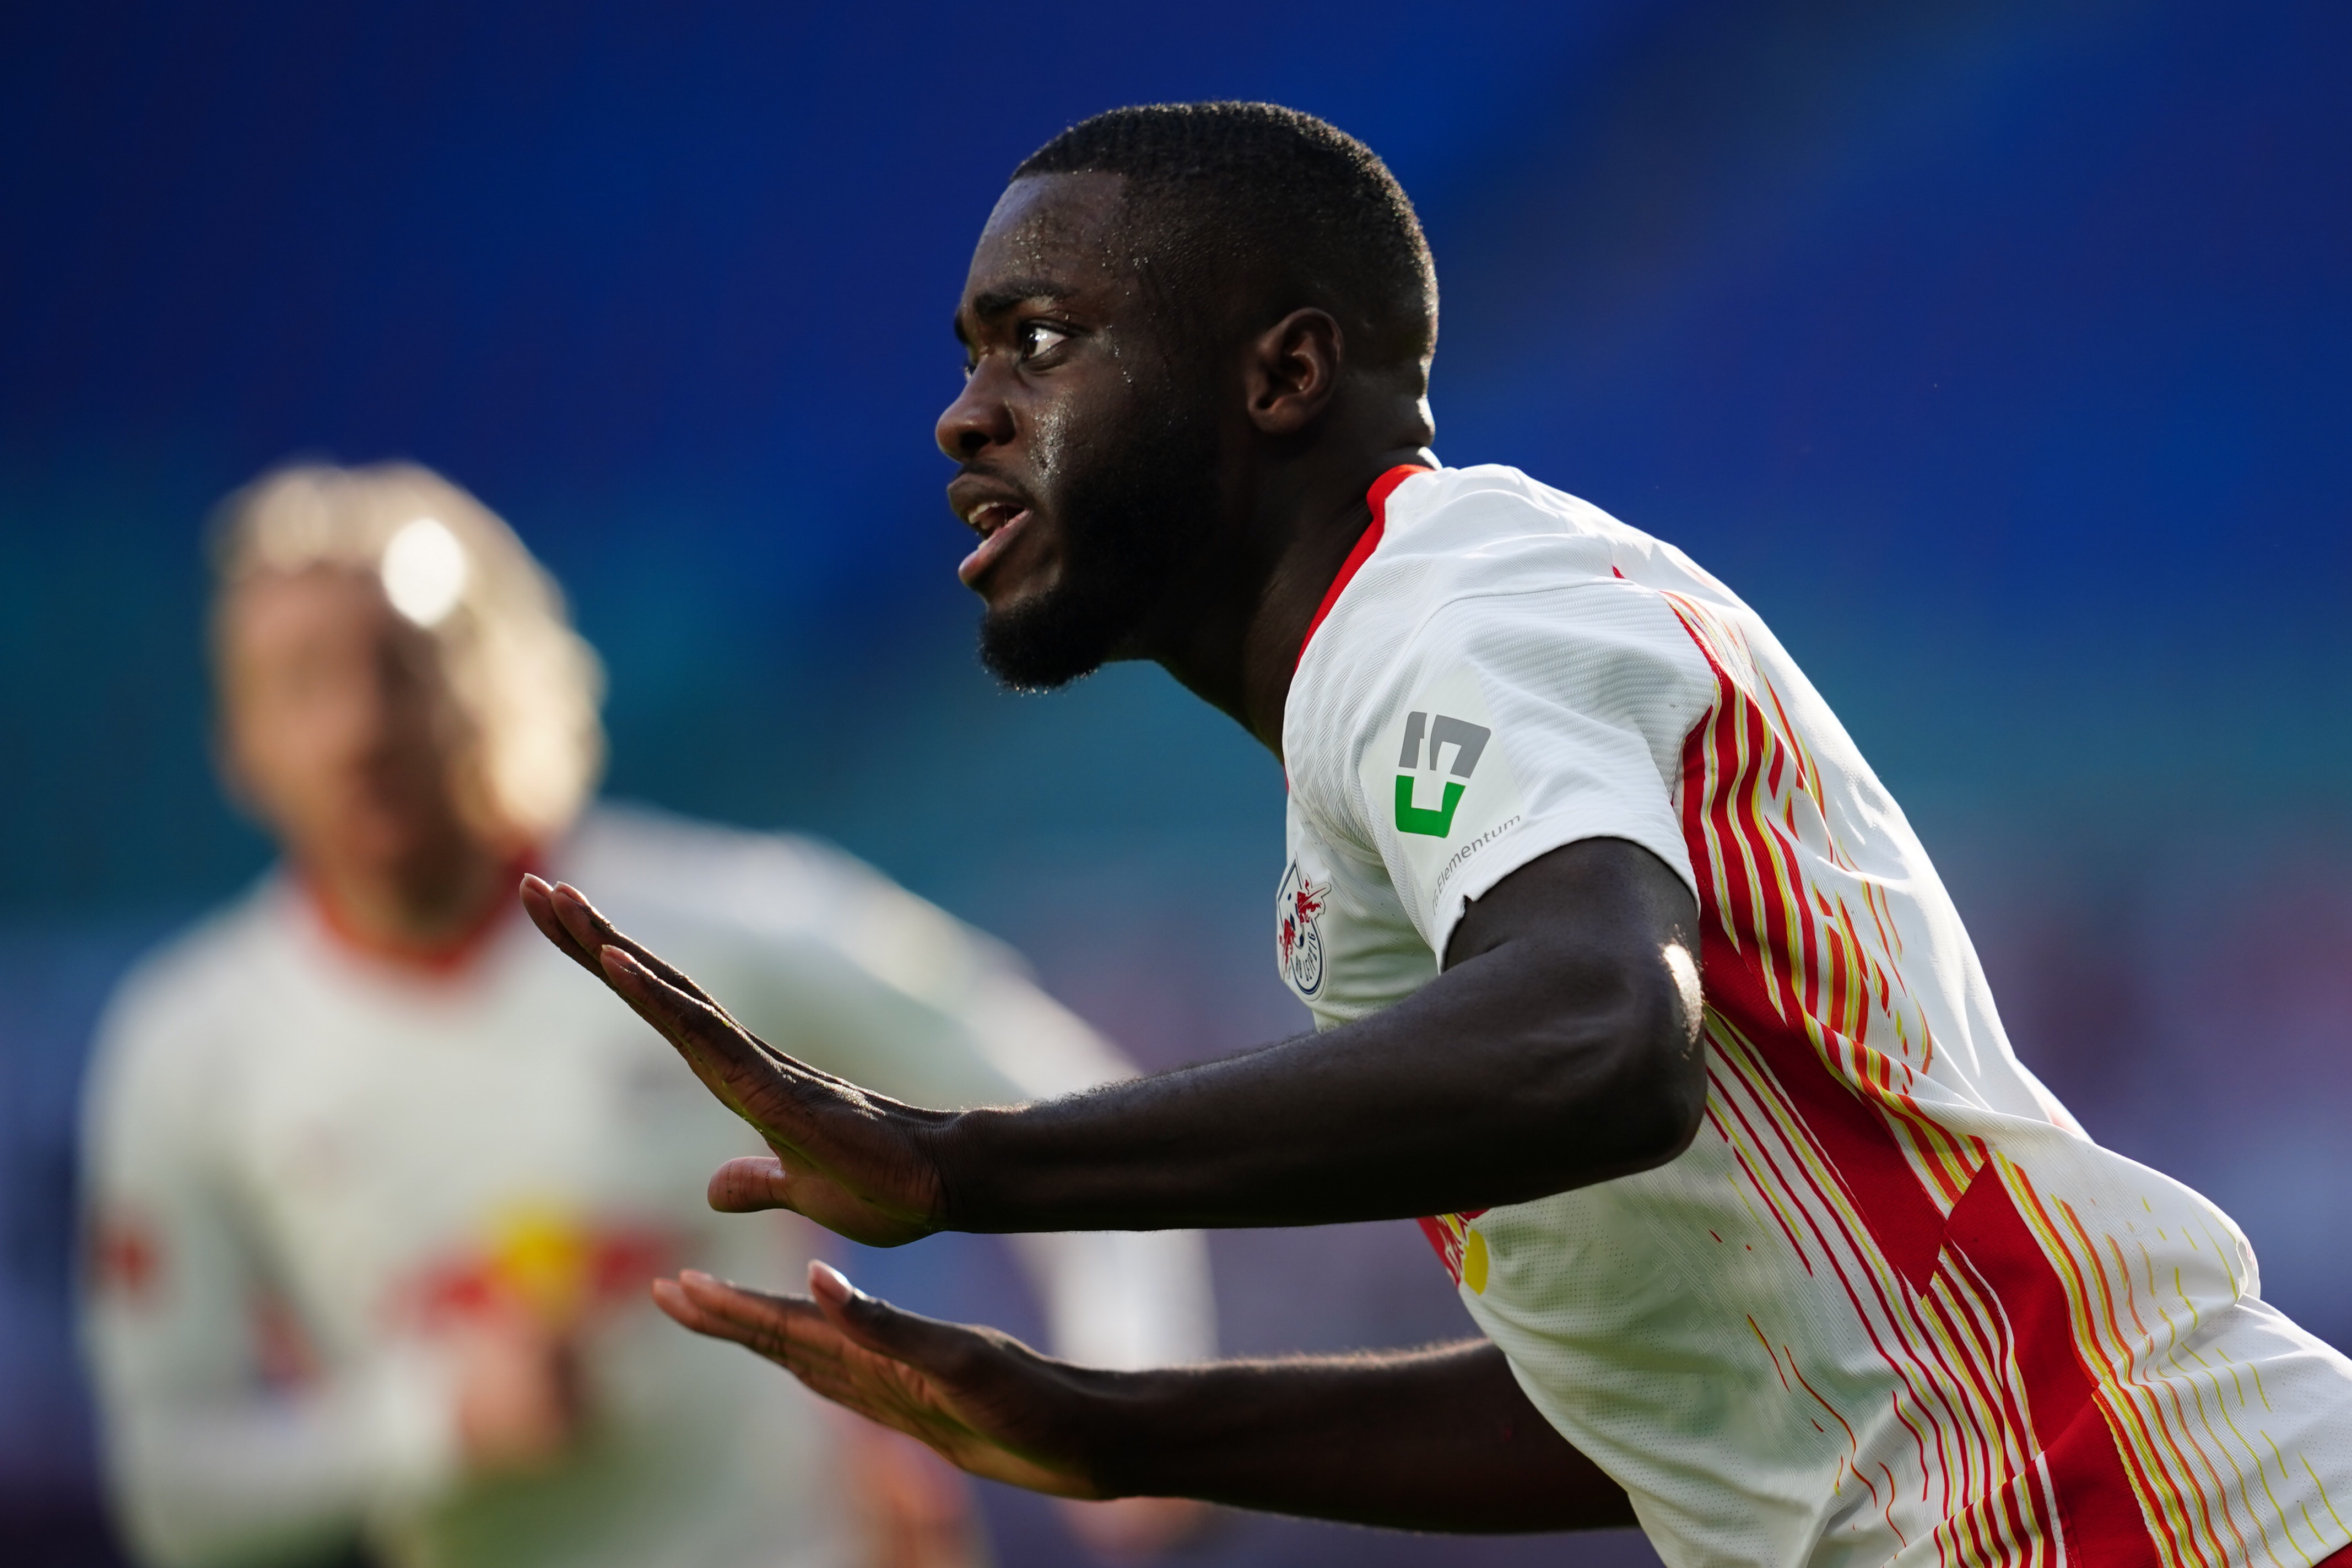 Man Utd fans think Dayot Upamecano transfer would have been mistake after horror display against Liverpool. The Projects World